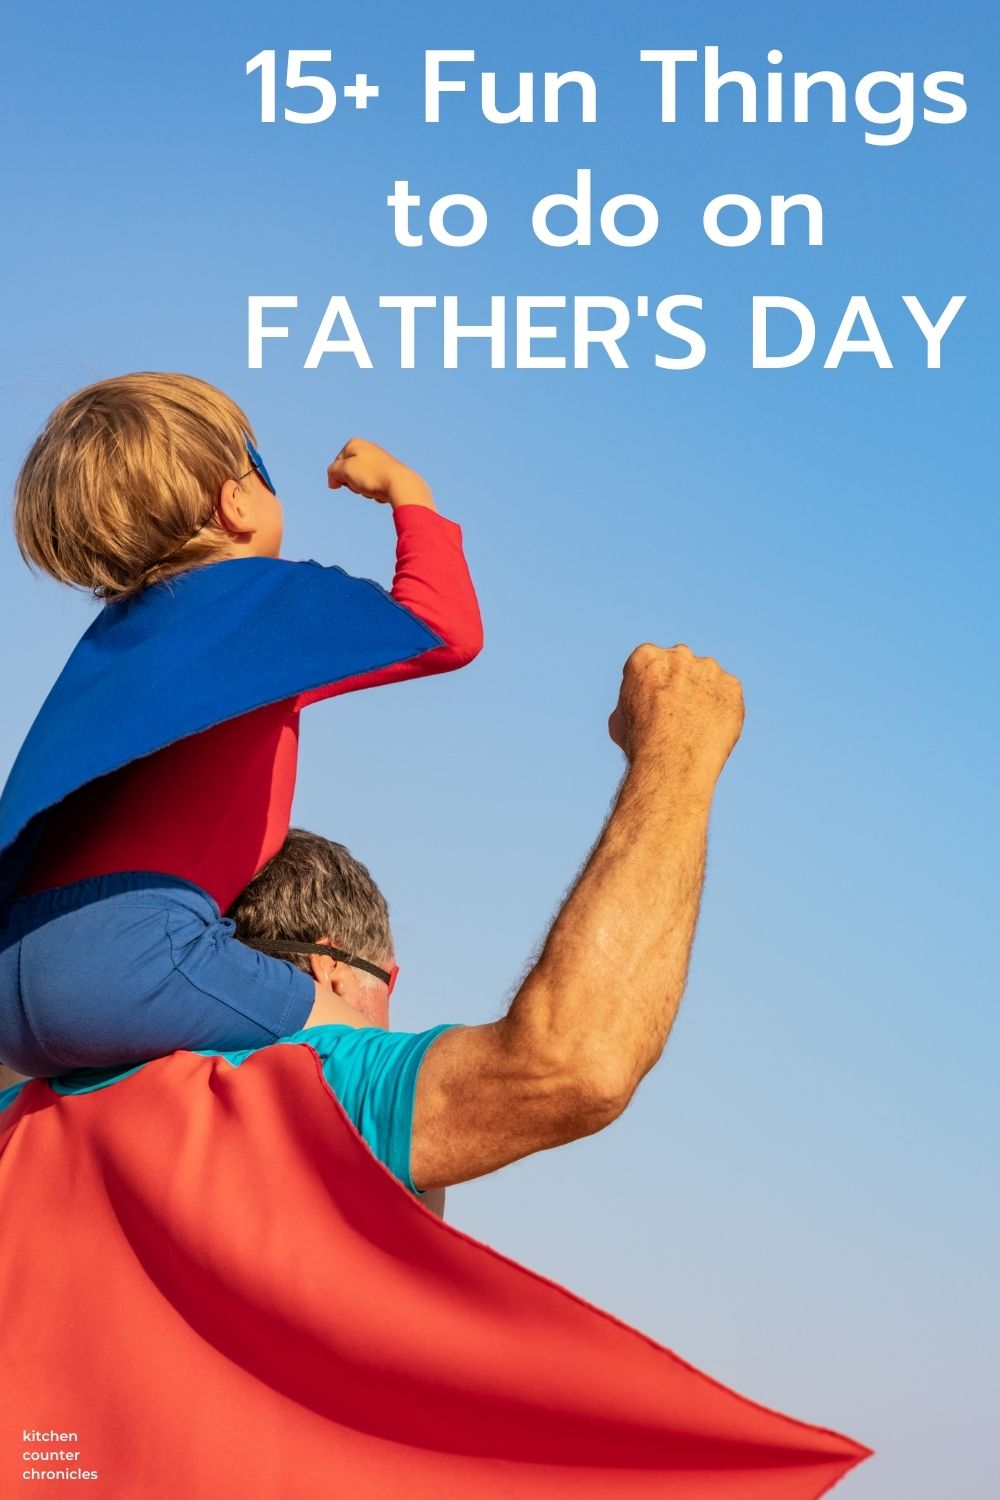 fun things to do on father's day title with dad and kid in superhero capes